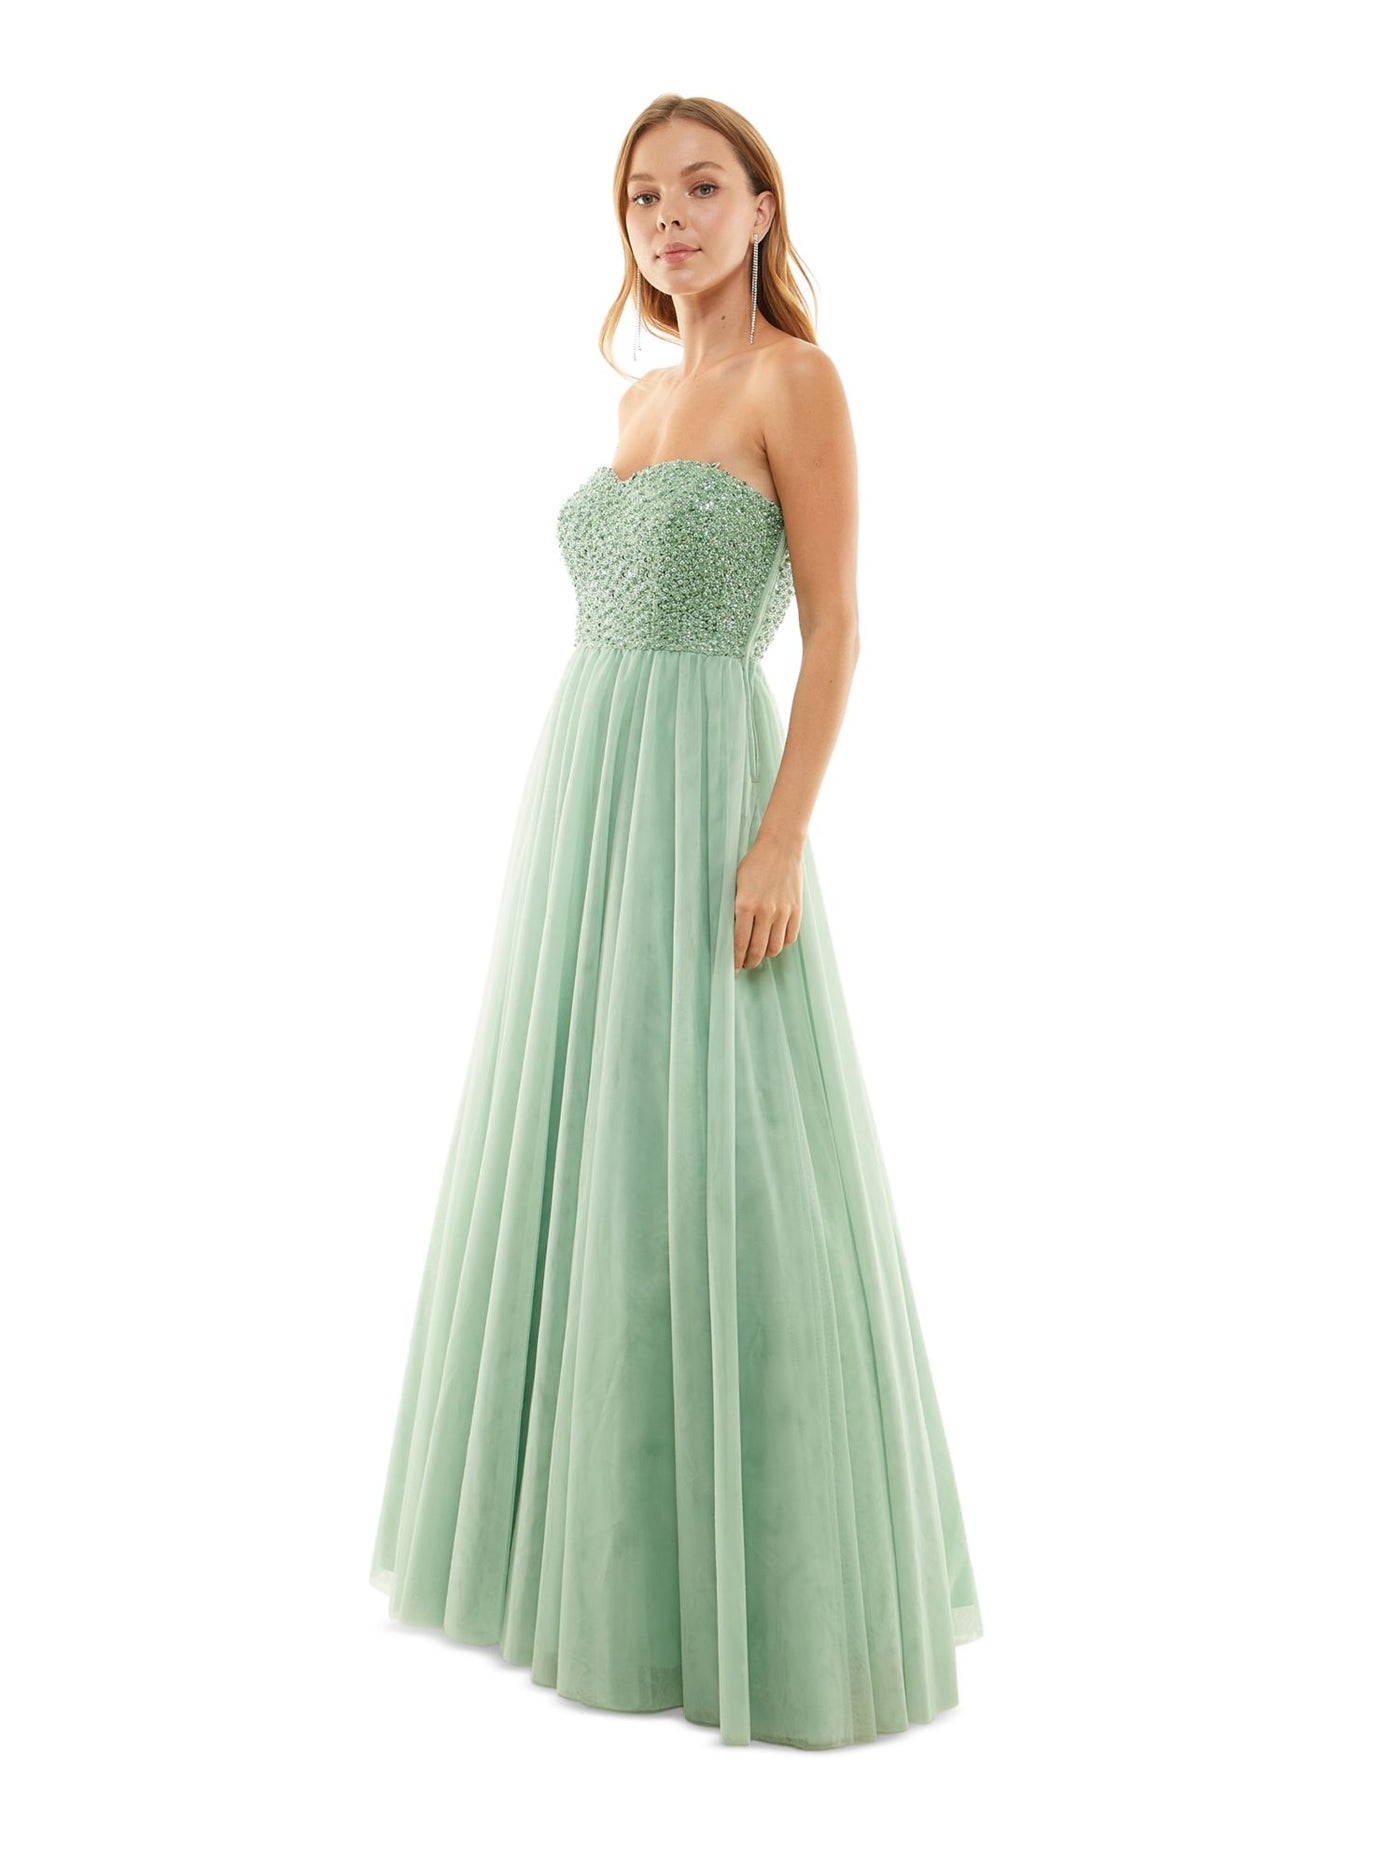 SAY YES TO THE PROM Womens Green Embellished Zippered Padded Lined Tulle Mesh Sleeveless Sweetheart Neckline Full-Length Party Gown Dress Juniors 0